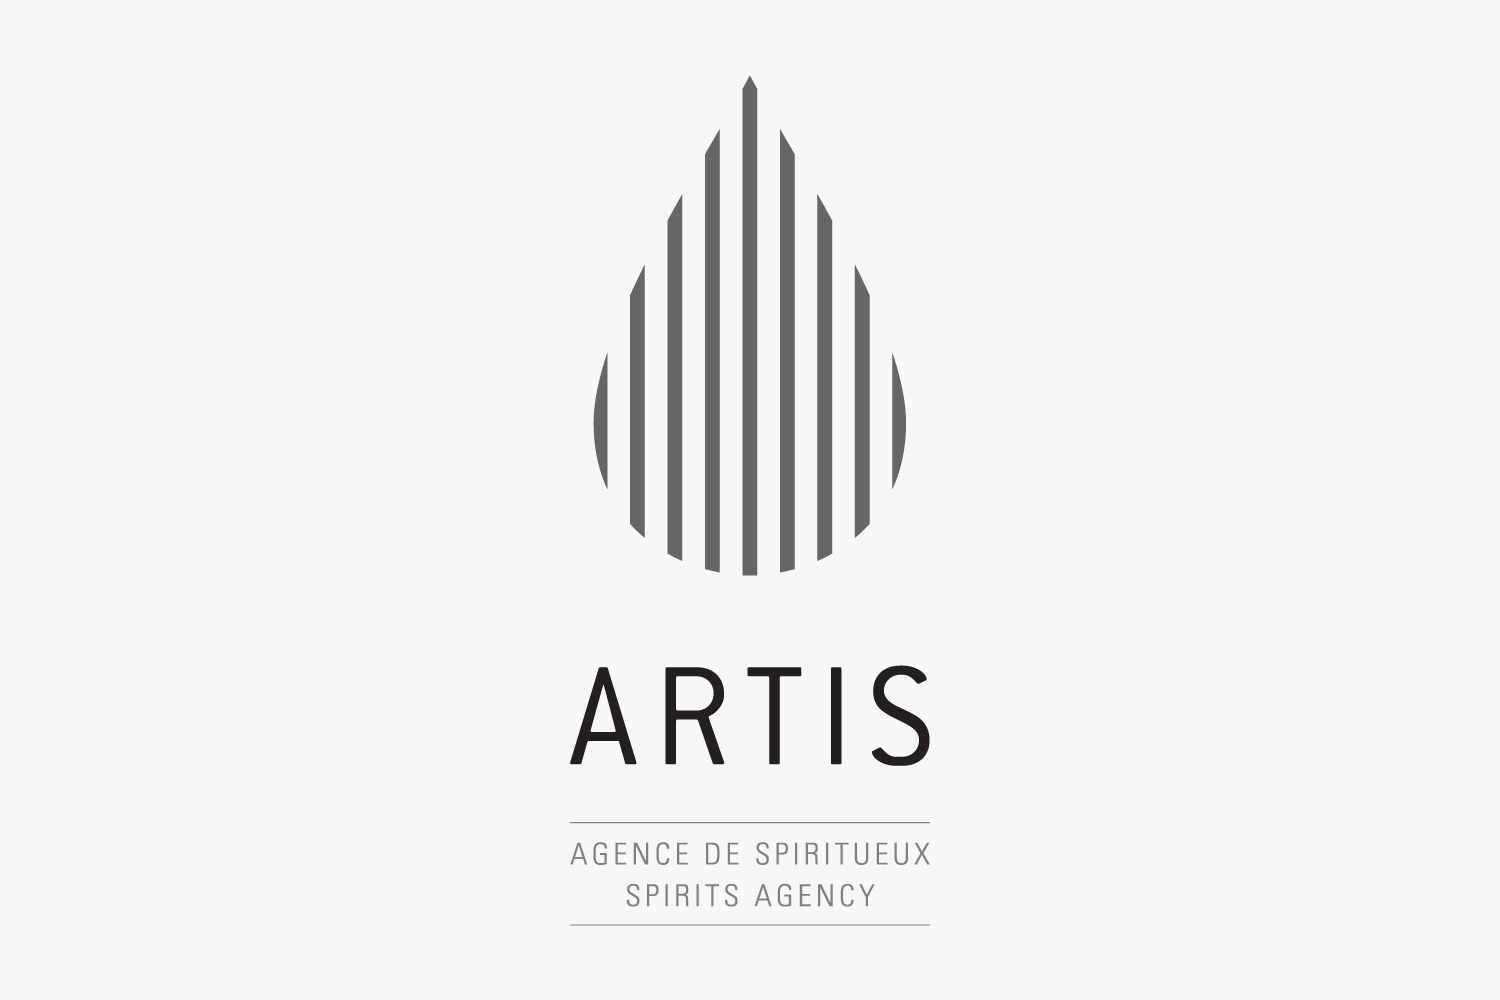 ARTIS – Spirits Agency – Identity, Web & Typography by Isabelle Robida – Infrarouge [Design & Culture] – 2015 – infrarouge.ca